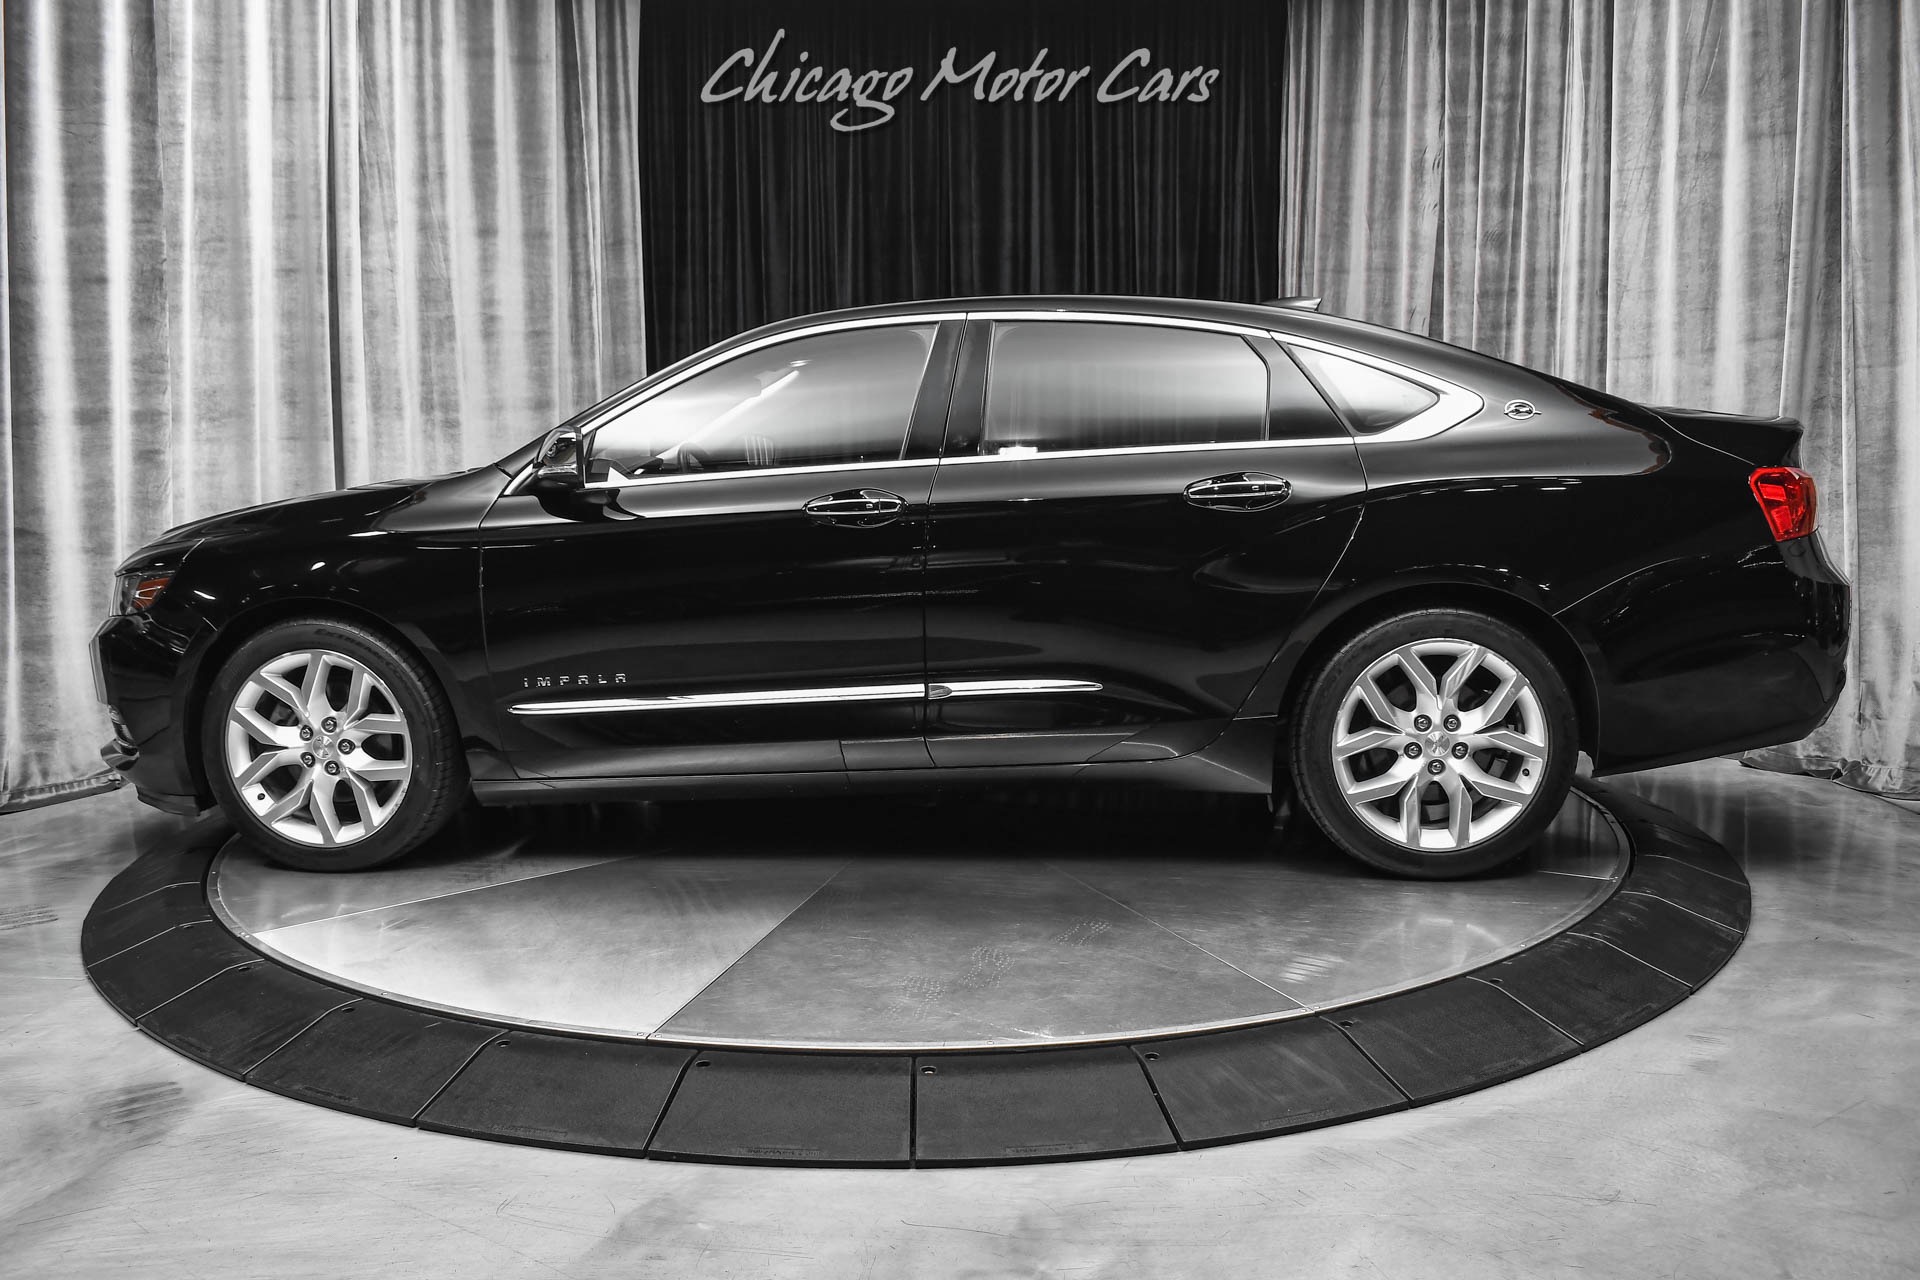 Used 2015 Chevrolet Impala LTZ 2LZ Sedan Heated Front Seats! 3.6 V6 Engine!  Top-Of-The-Line!! For Sale (Special Pricing) | Chicago Motor Cars Stock  #19583A